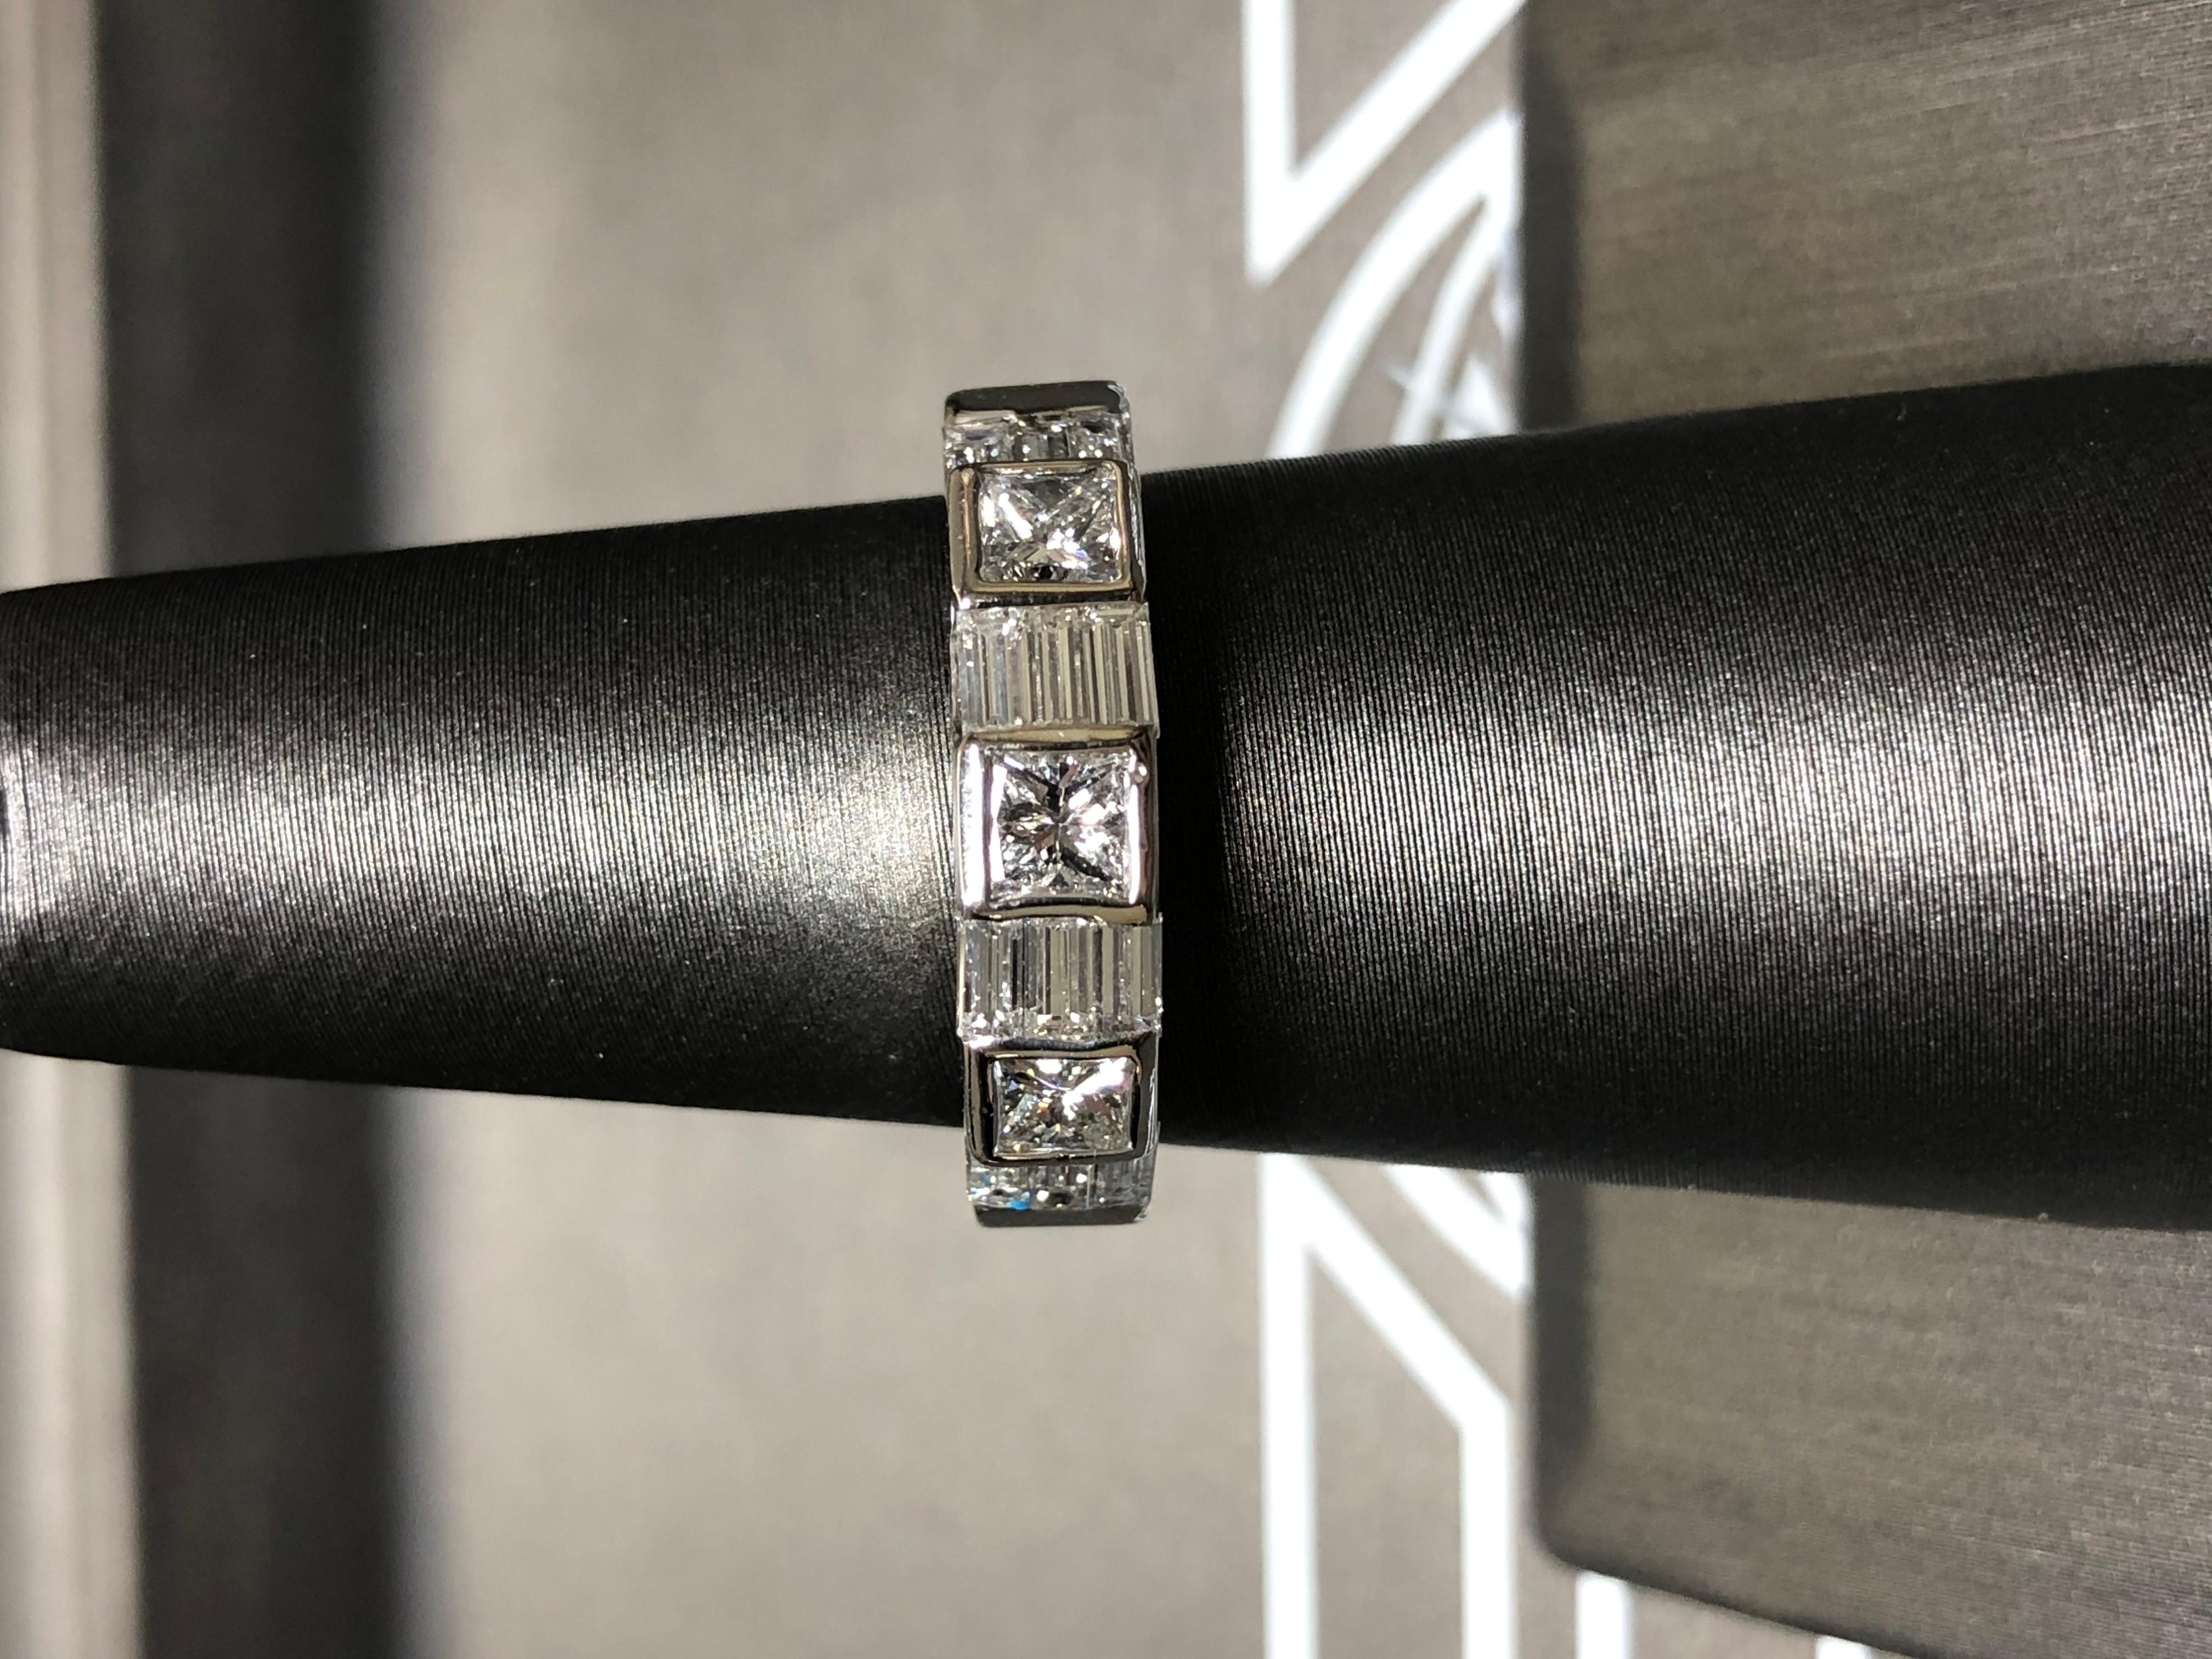 
A striking estate band crafted in 18K white gold tension and bezel set with approximately 1.47cttw in G-H color Vs1 clarity princess and baguette cut diamonds (princess cuts average .25ct each stone).


Dimensions/Weight:

Ring measures .20” wide